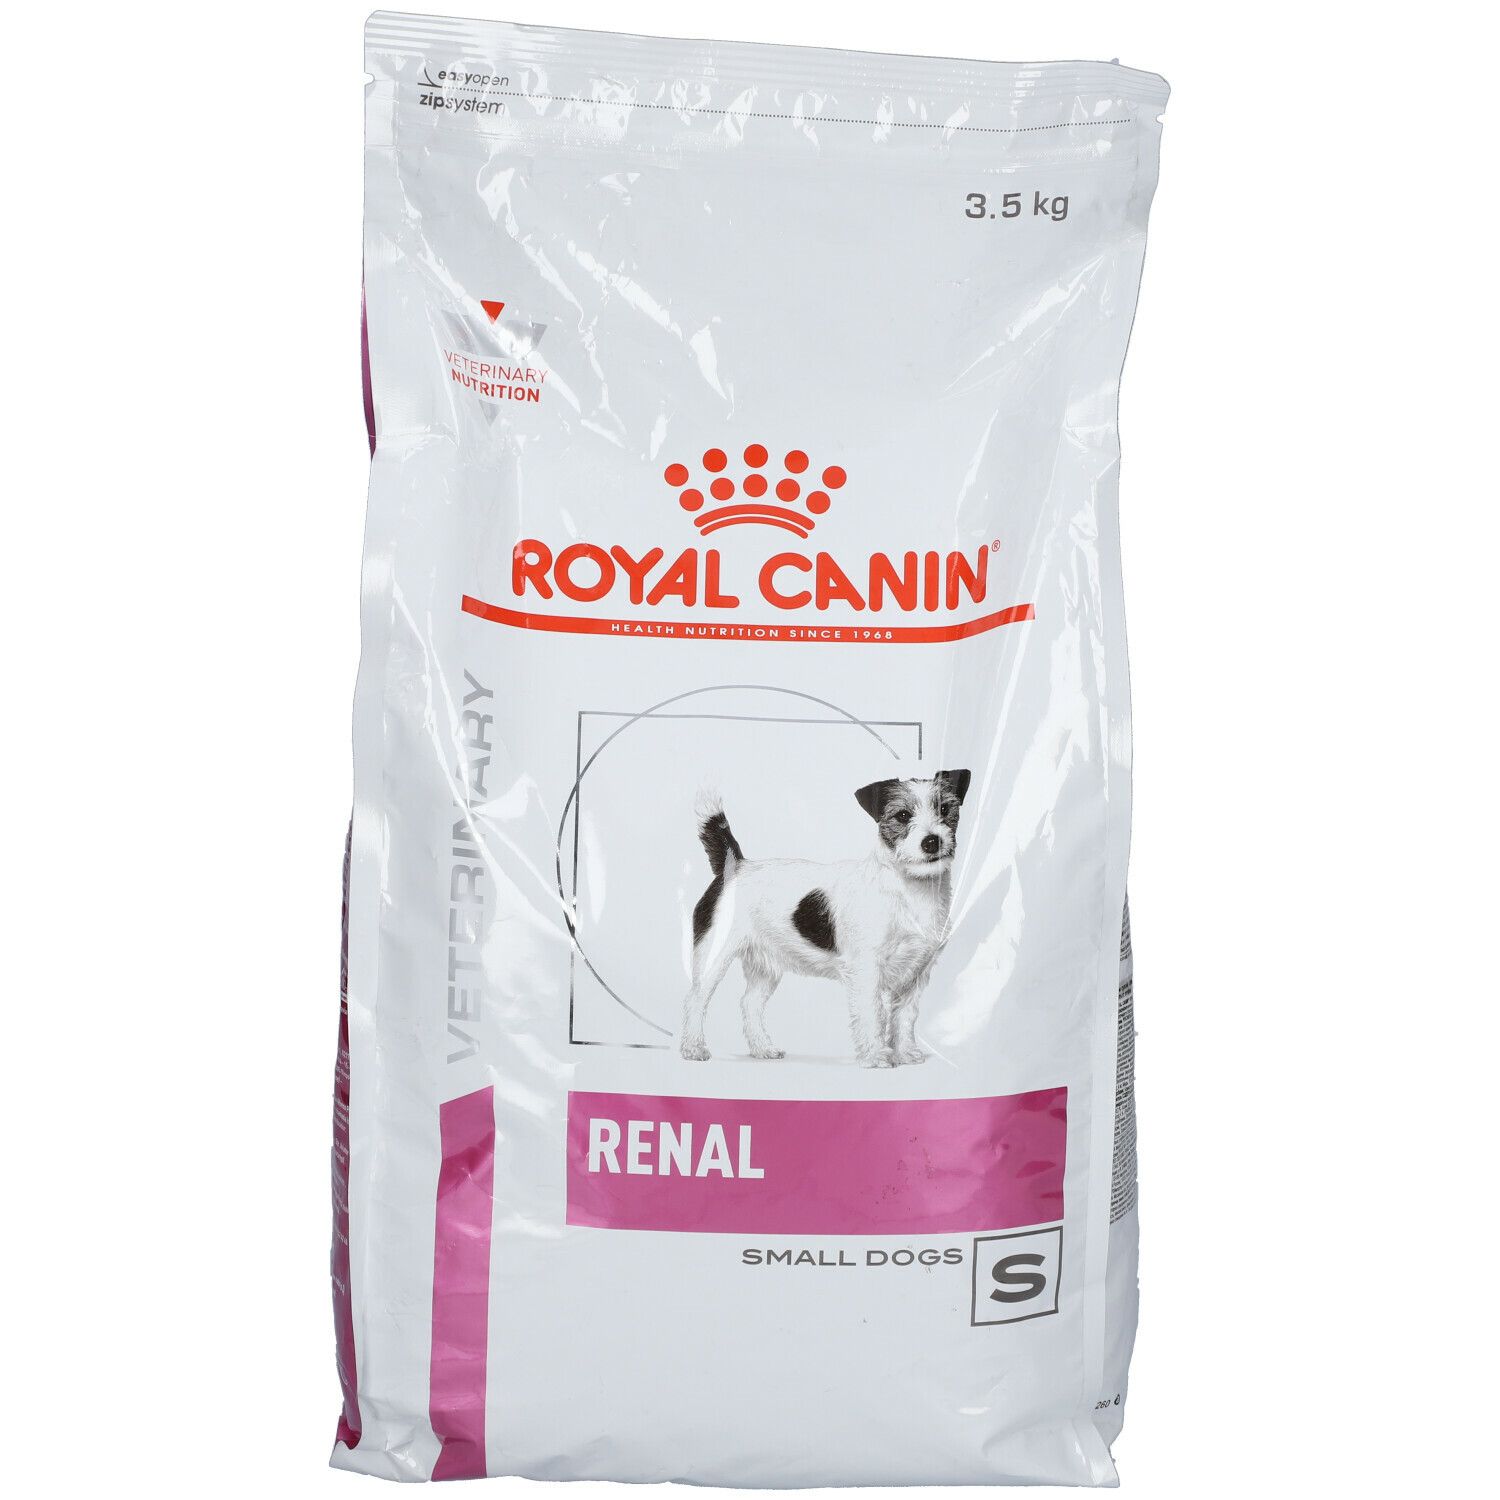 Royal Canin Veterinary Canine Renal Small Dogs